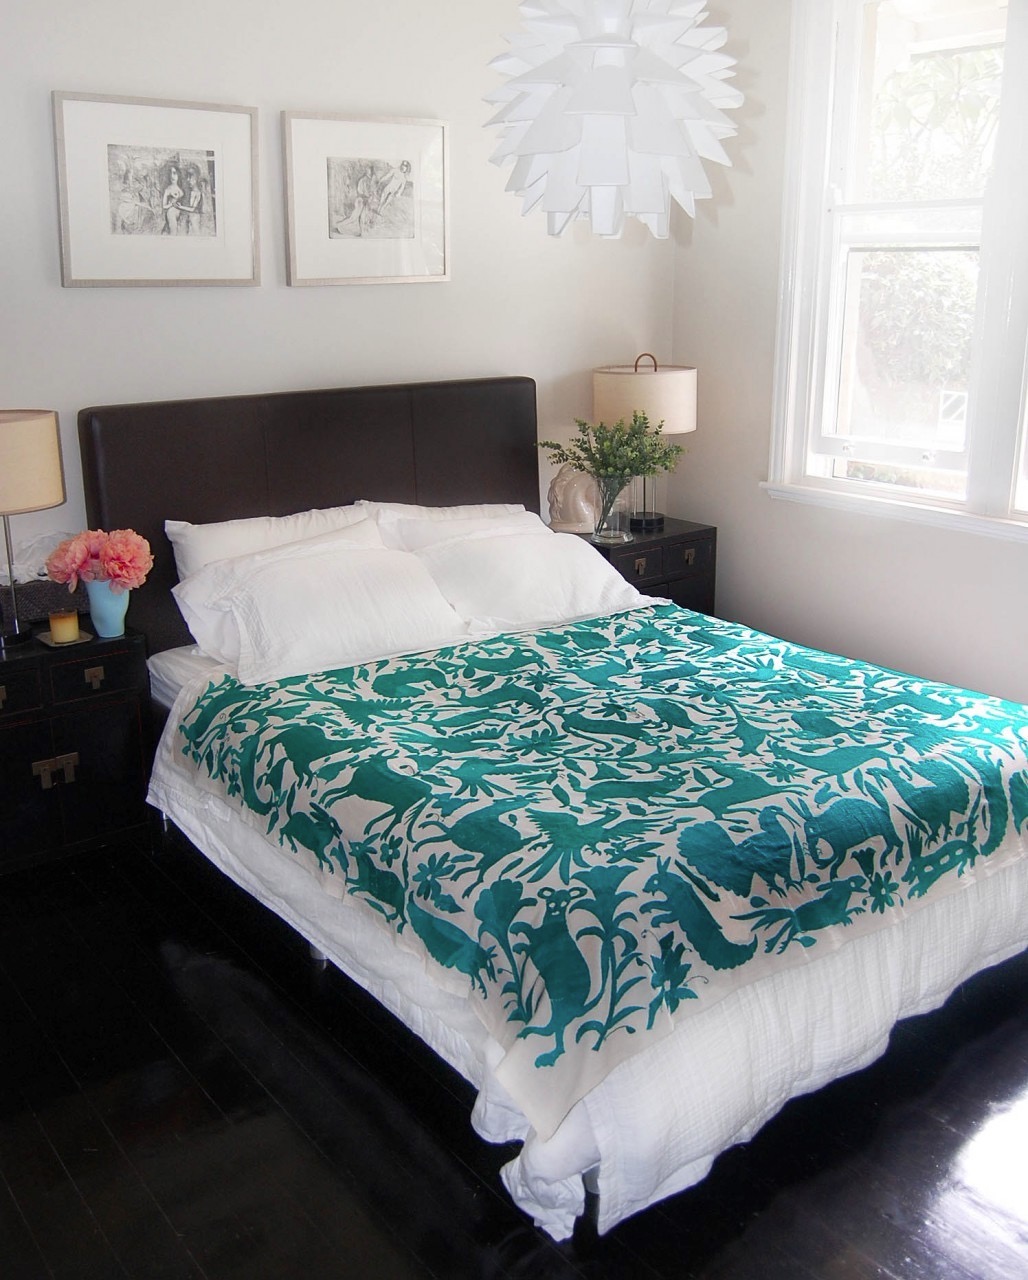 Queen Size Mexican Suzani Bedspread in Teal via Table Tonic | More #aqua #teal & #turquoise on the RSD Blog www.rsdesigns.com.au/blog/